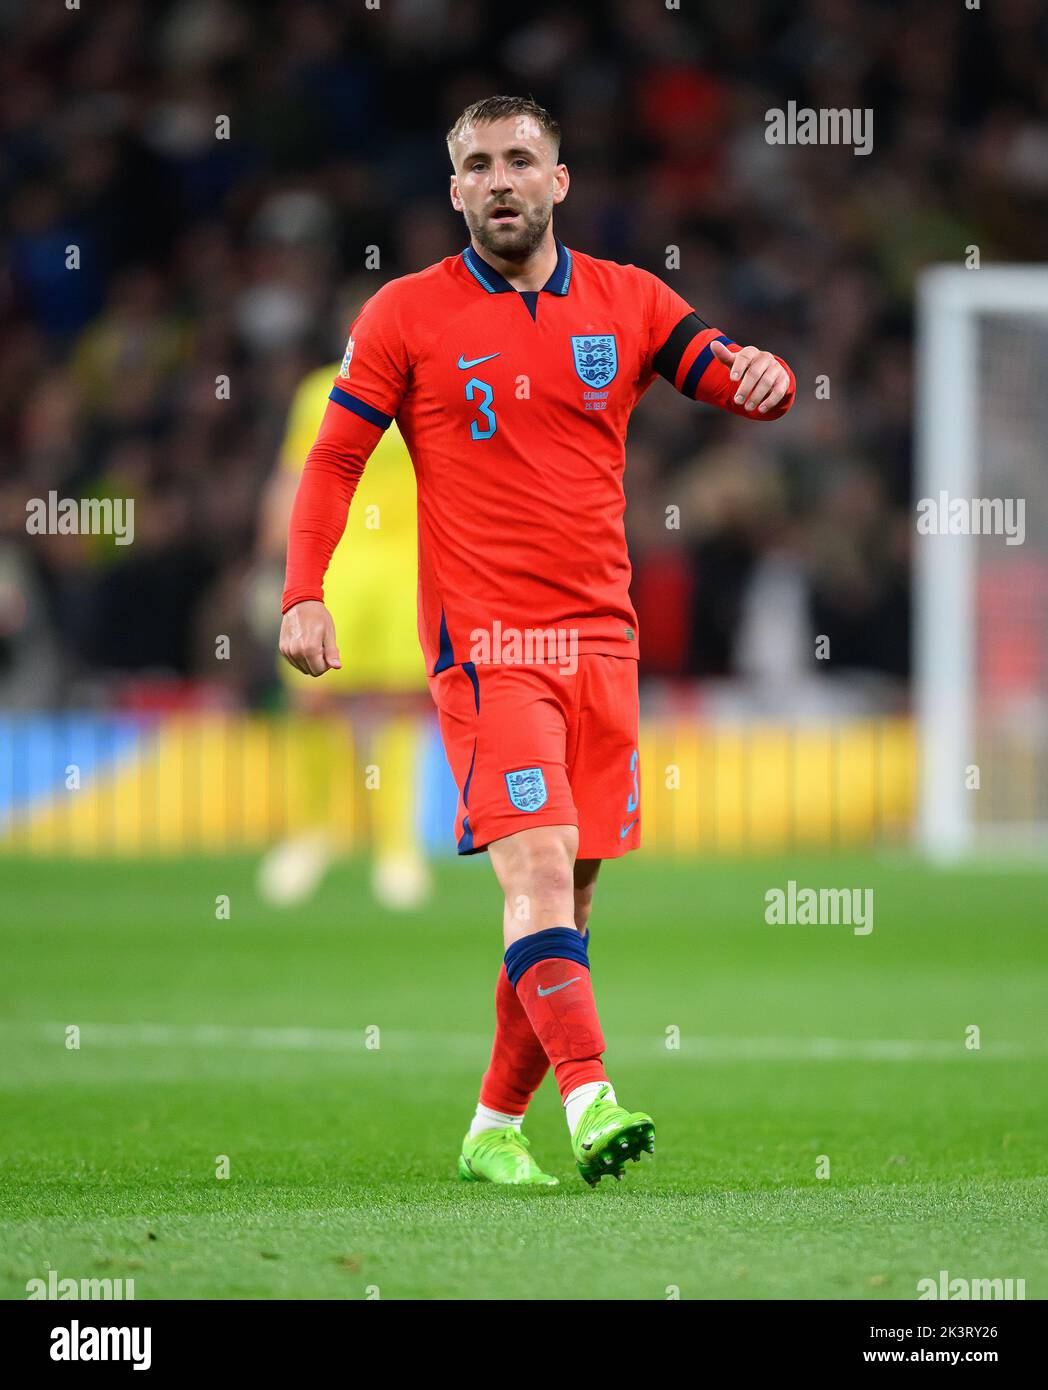 23 Sep 2022 - Italy v England - UEFA Nations League - Group 3 - San Siro  England's Luke Shaw during the UEFA Nations League match against Italy. Picture : Mark Pain / Alamy Live News Stock Photo